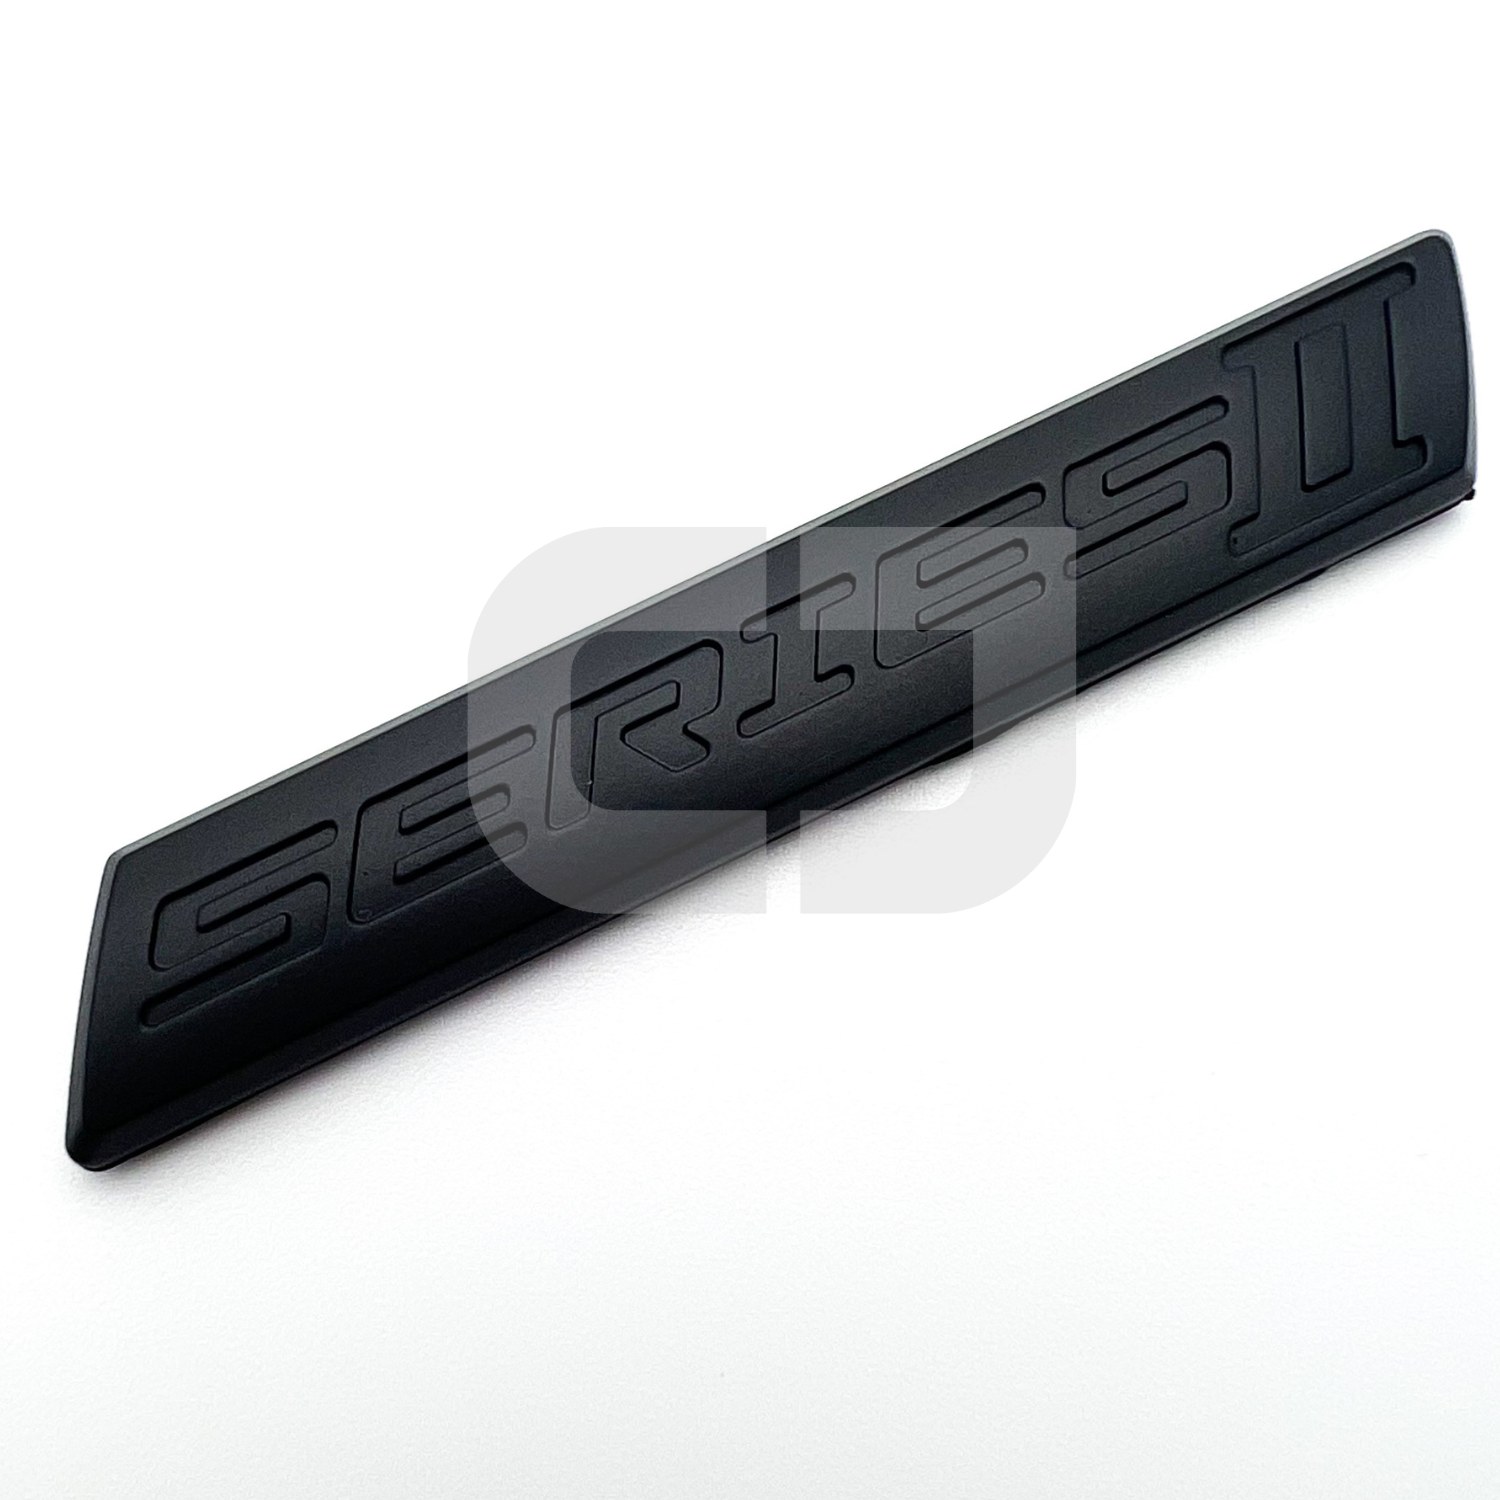 Holden Matte Black Series 2 Series II Badge Fits VF Commodore